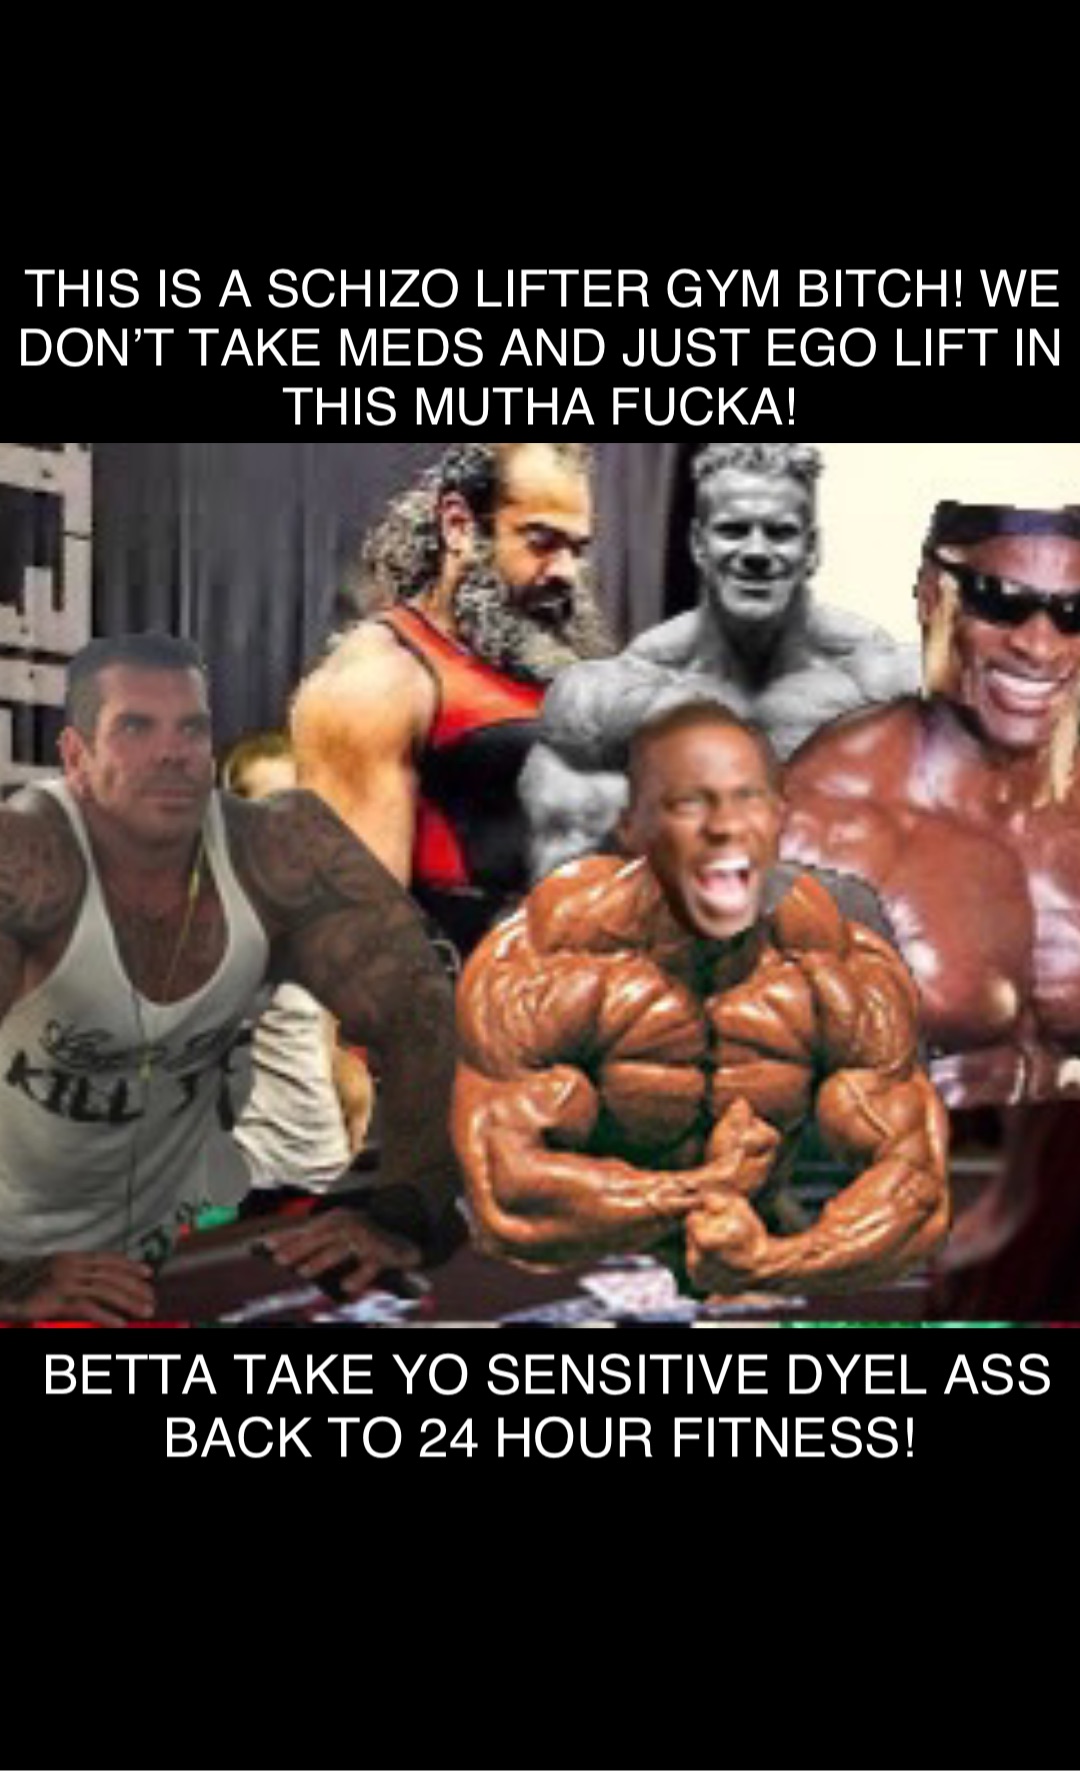 Double tap to edit Double tap to edit THIS IS A SCHIZO LIFTER GYM BITCH! WE DON’T TAKE MEDS AND JUST EGO LIFT IN THIS MUTHA FUCKA! BETTA TAKE YO SENSITIVE DYEL ASS BACK TO 24 HOUR FITNESS!